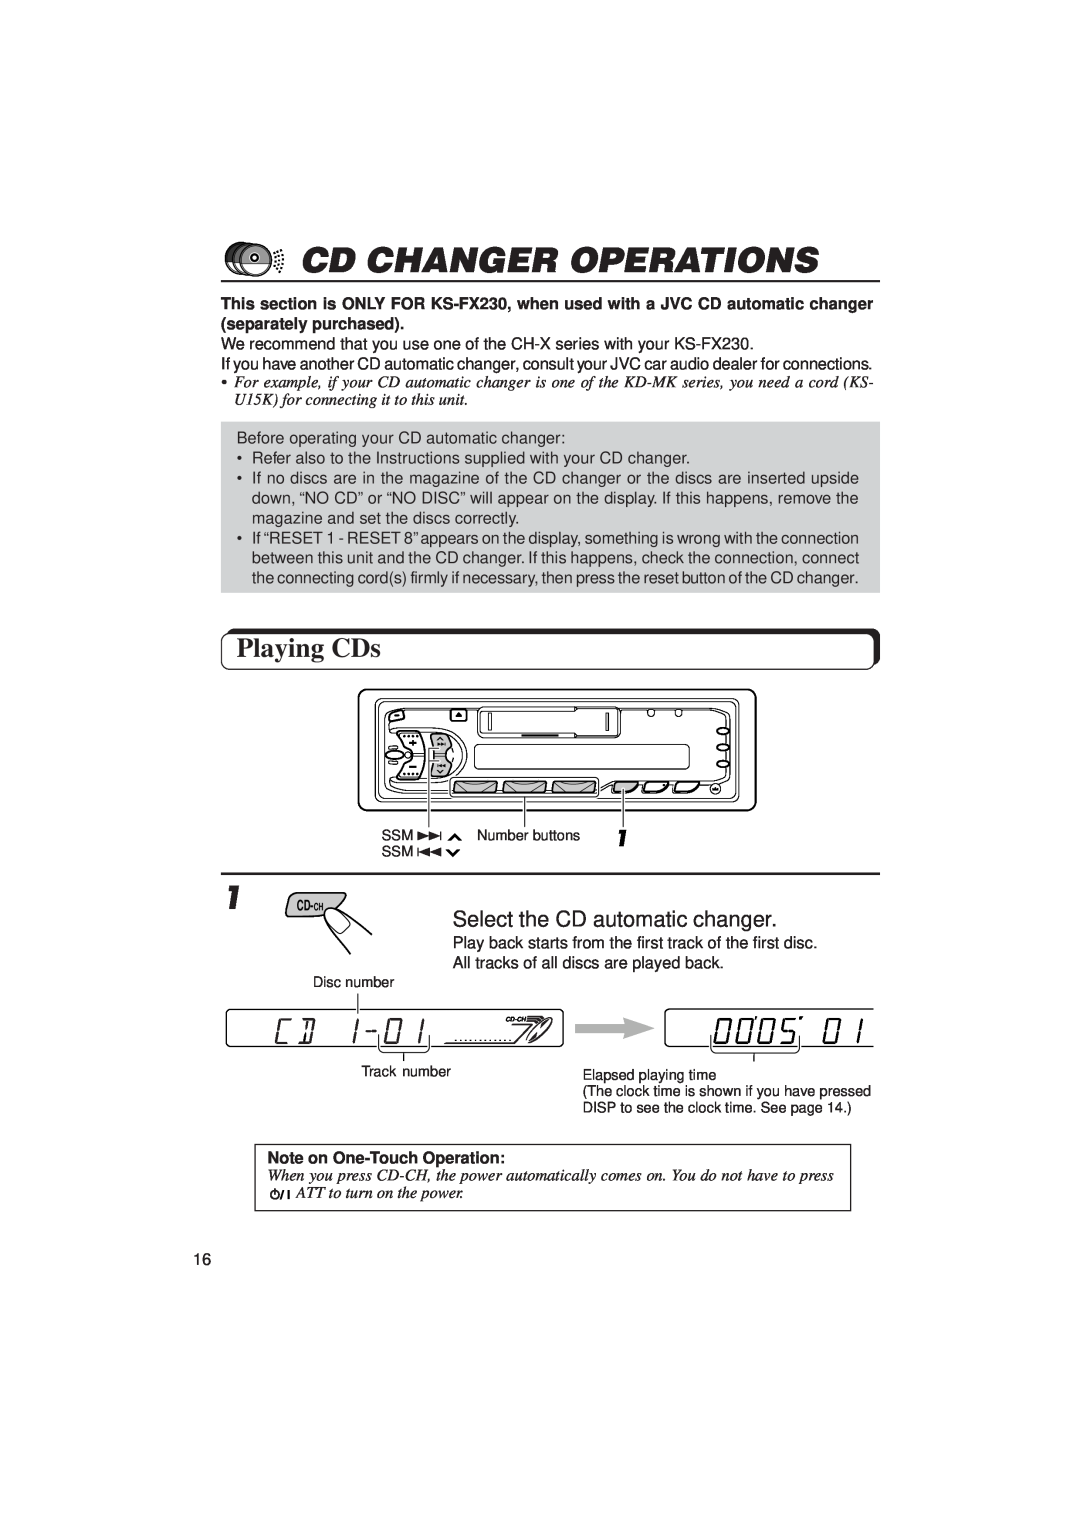 JVC KS-FX230, F130 manual Cd Changer Operations, Playing CDs, Note on One-TouchOperation 